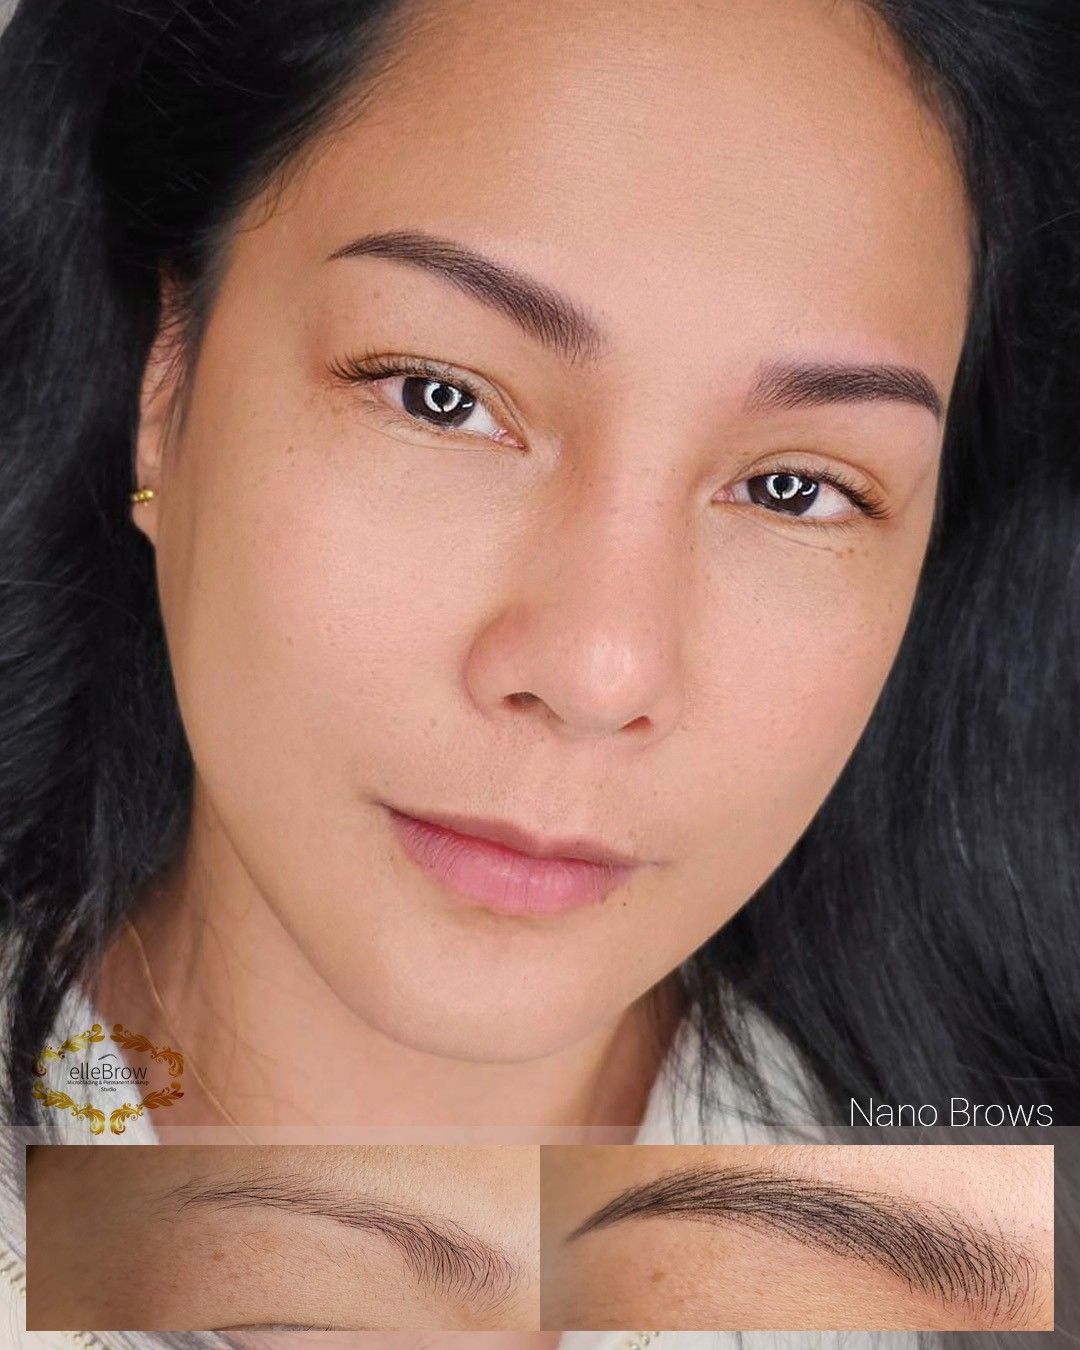 a before and after photo of a woman 's eyebrows - nano brows